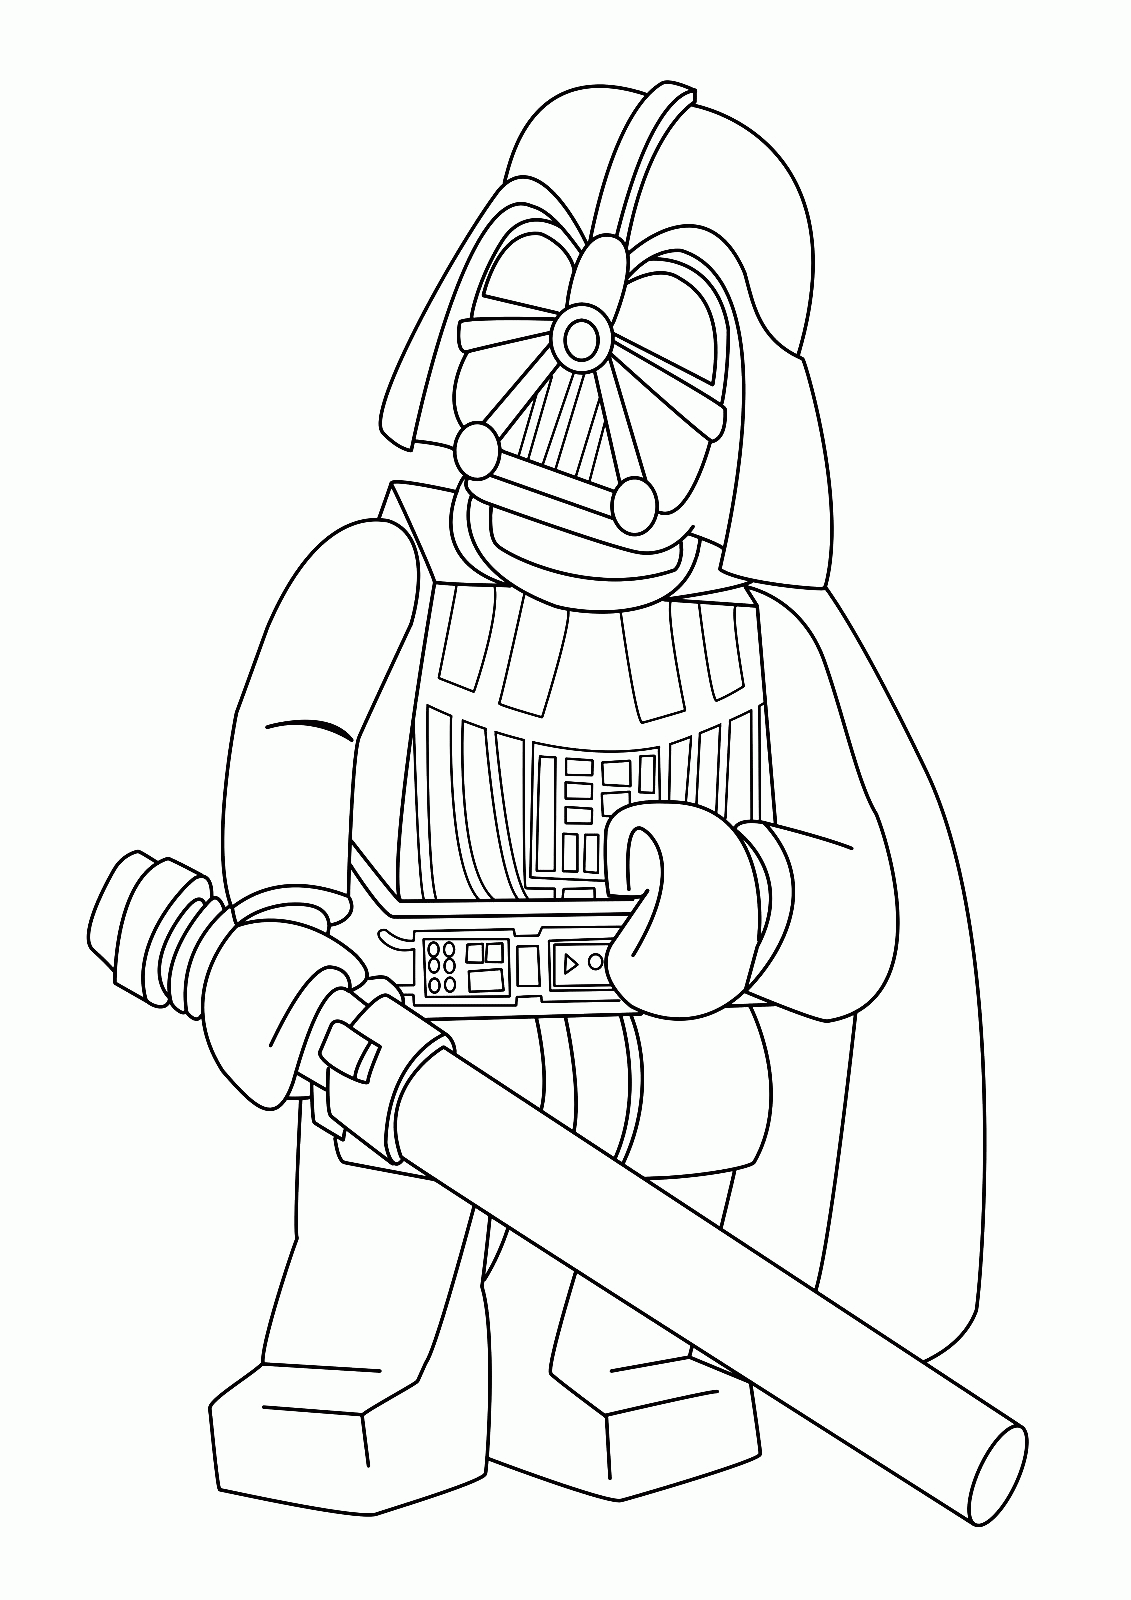 Kylo Ren coloring page | Free Printable Coloring Pages ...